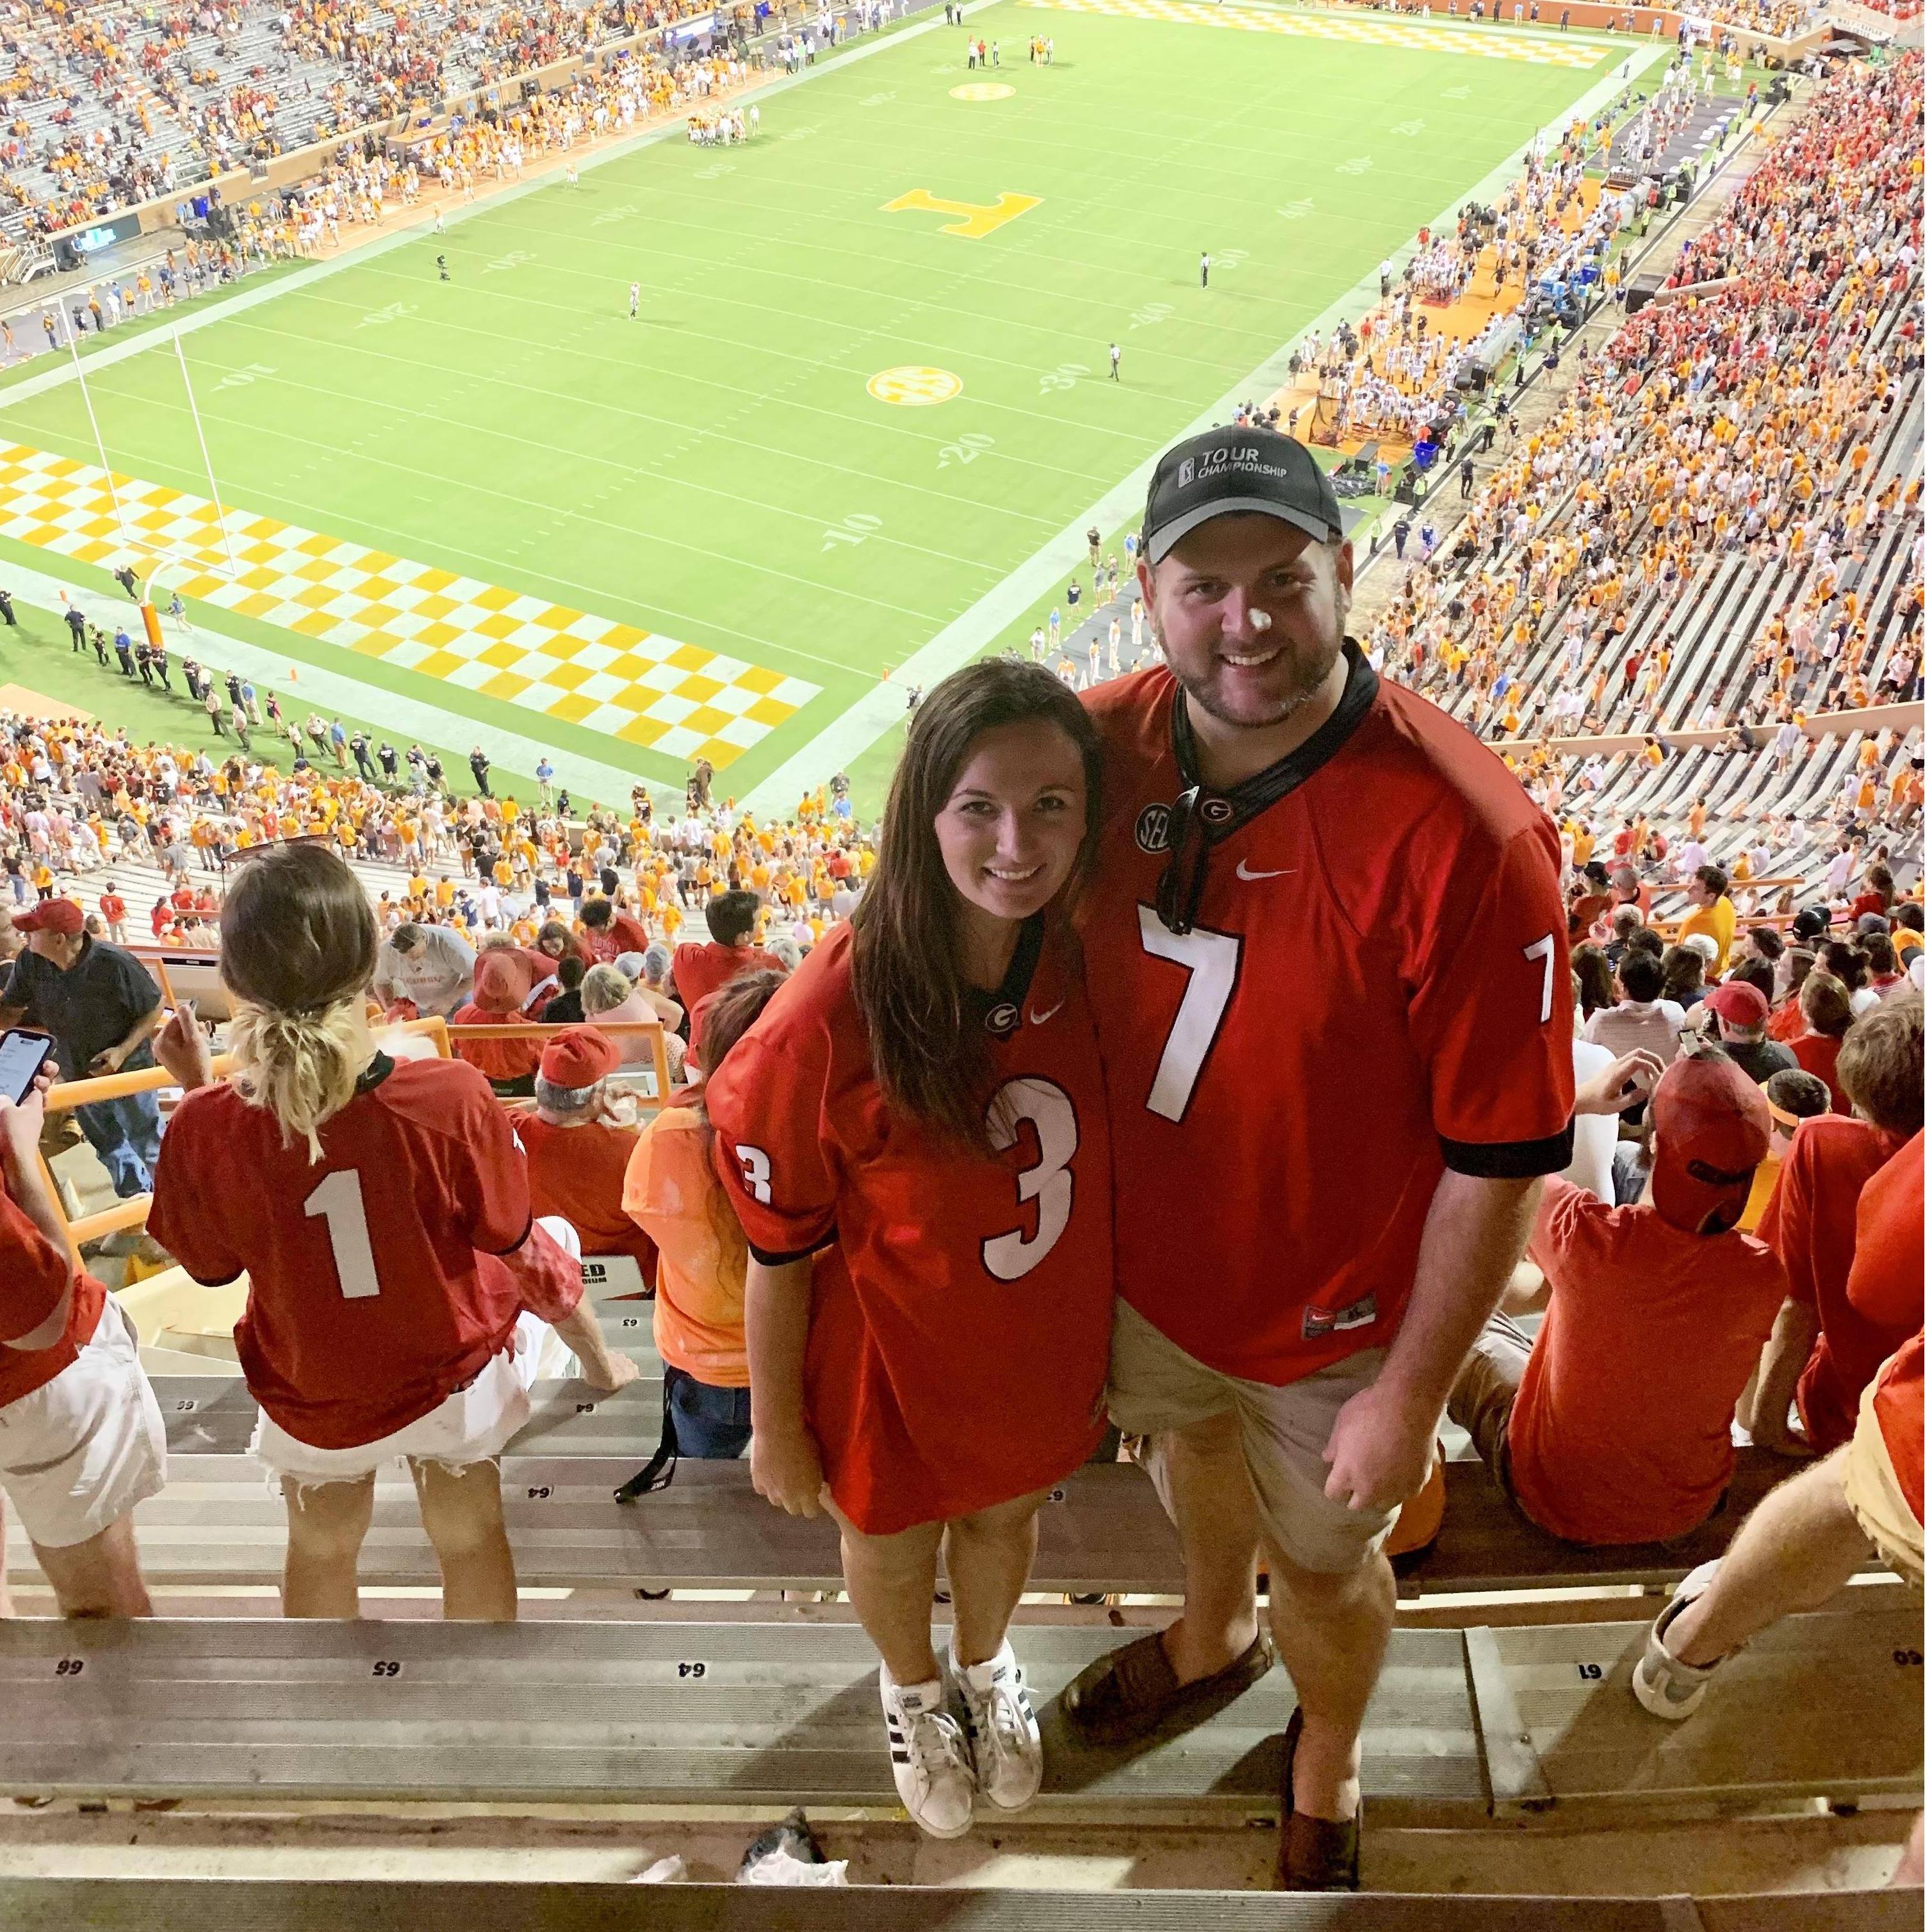 While Colt bleeds red & black now, he grew up a University of Tennessee fan because both of his parents attended the school. It's always fun to attend the UGA vs. UT game for the family rivalry.